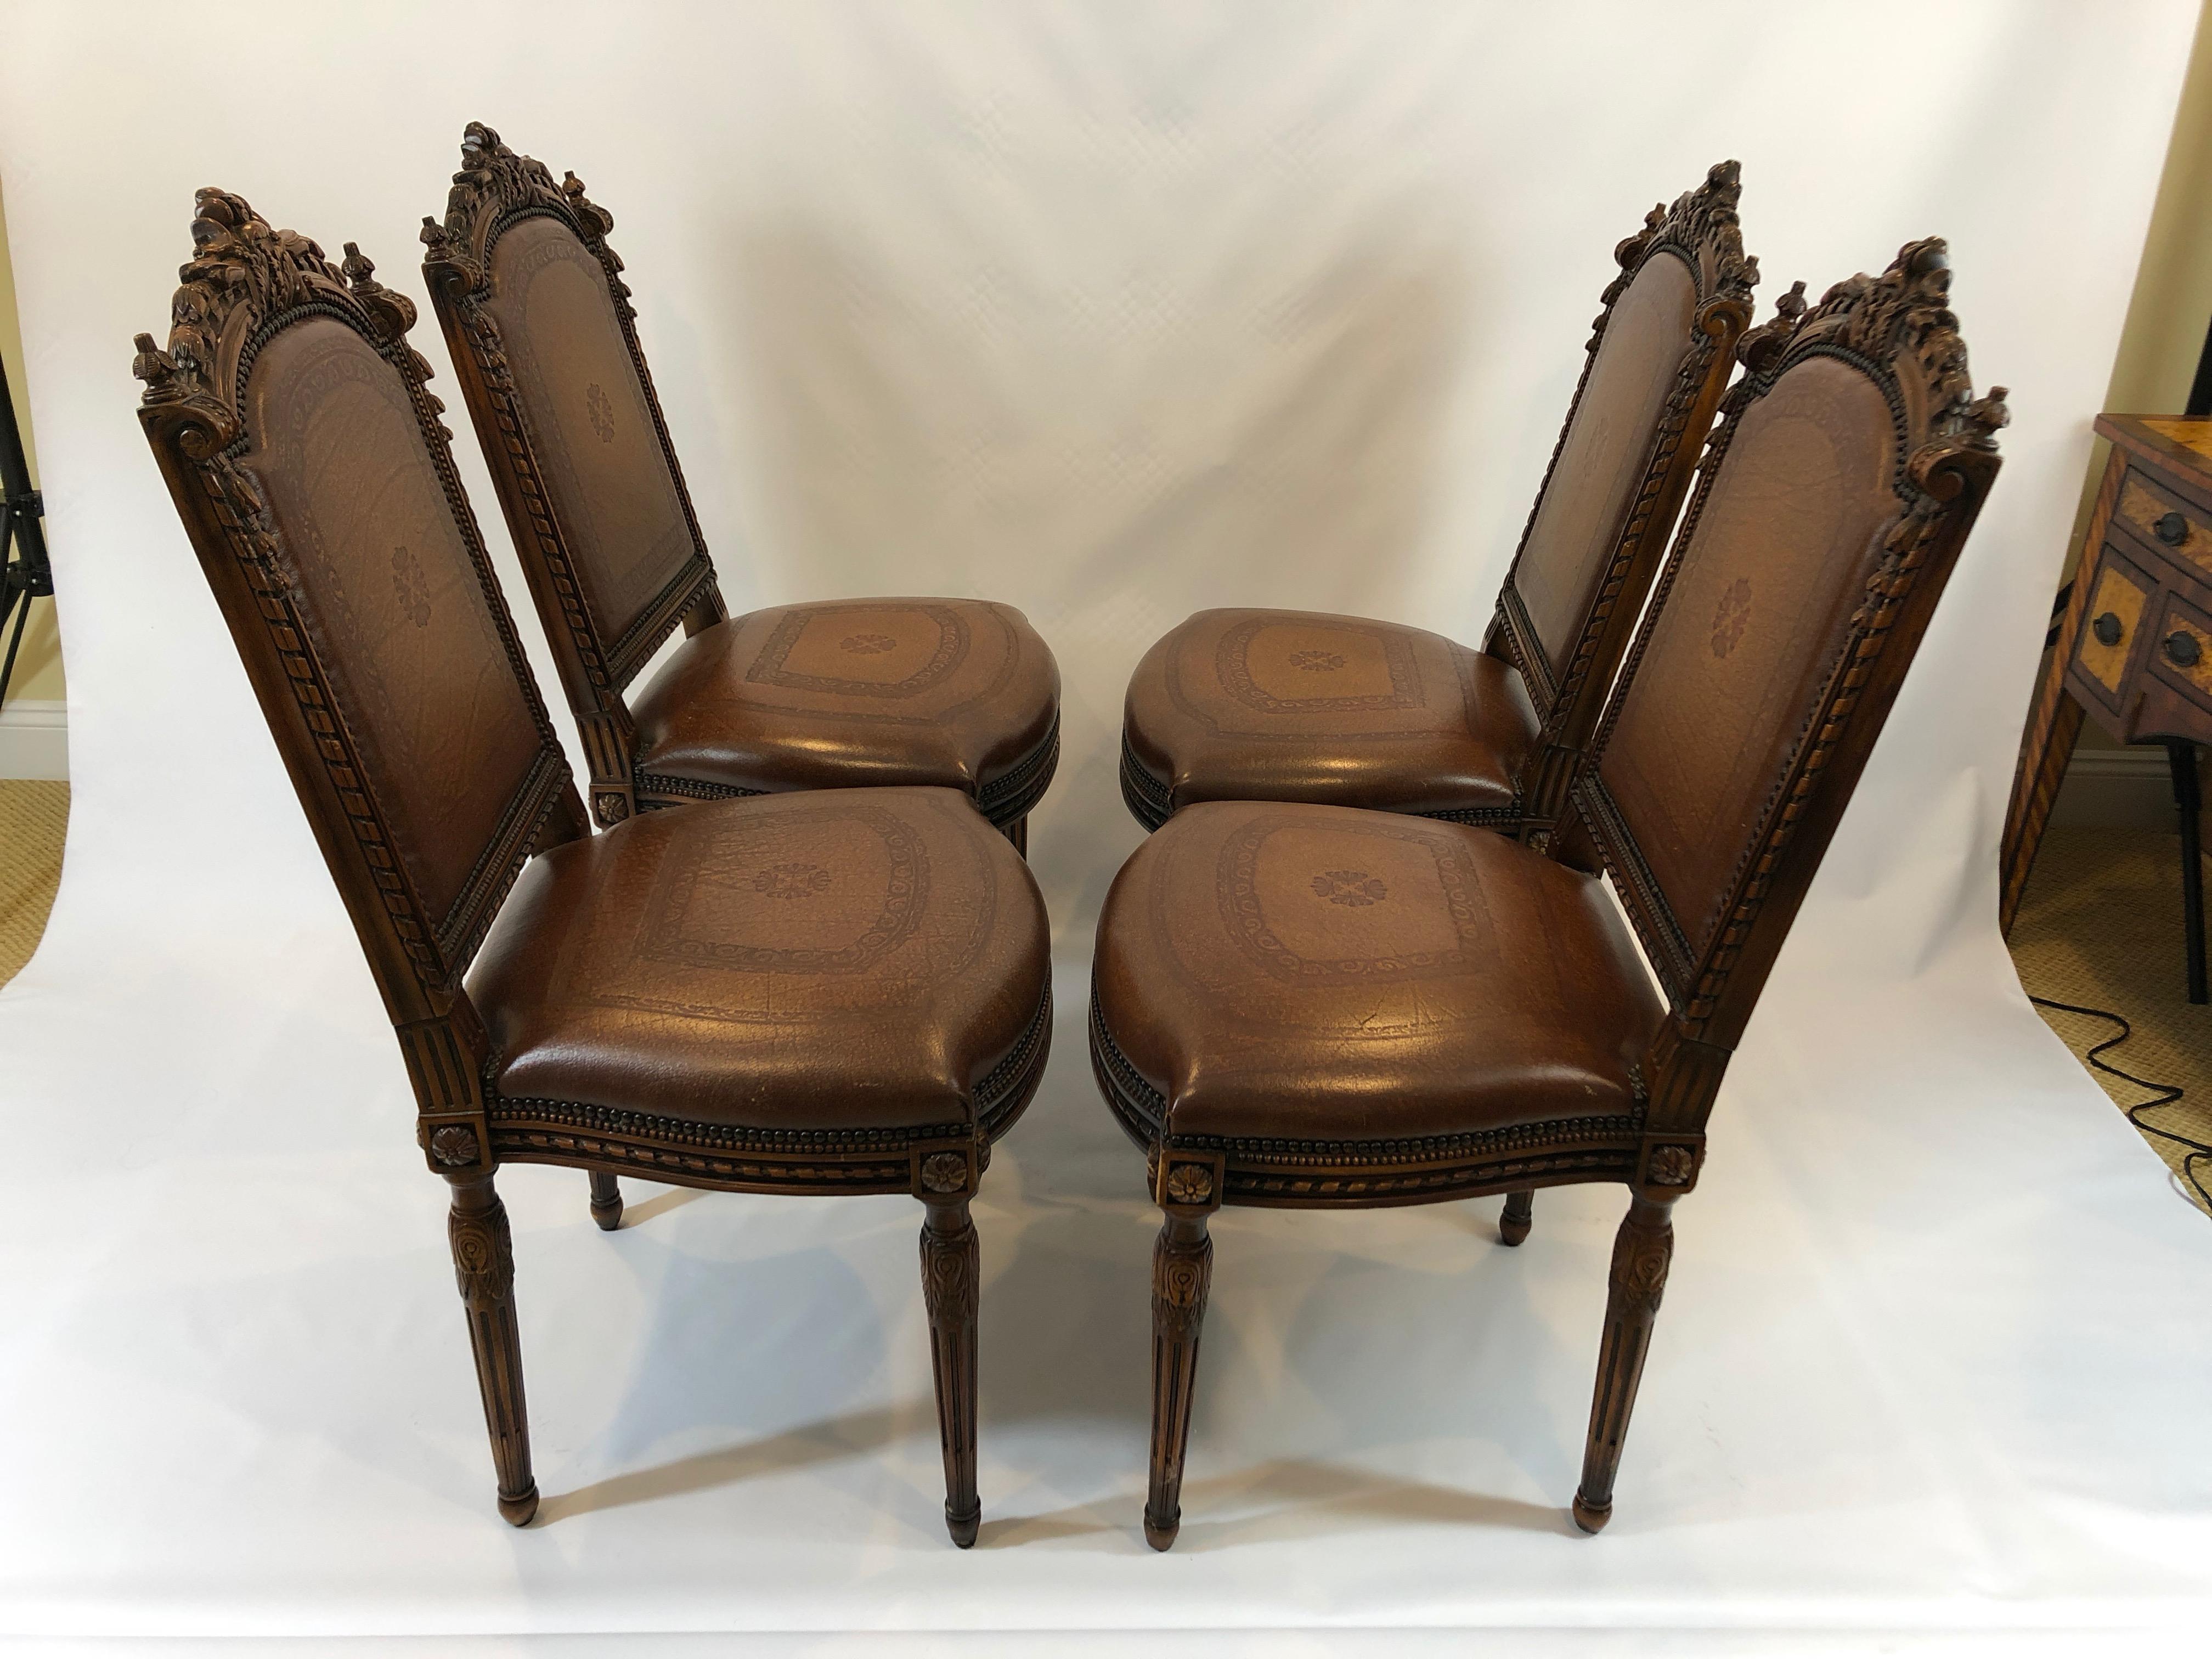 American Grand Set of 4 Theodore Alexander Carved Walnut and Leather Side Dining Chairs